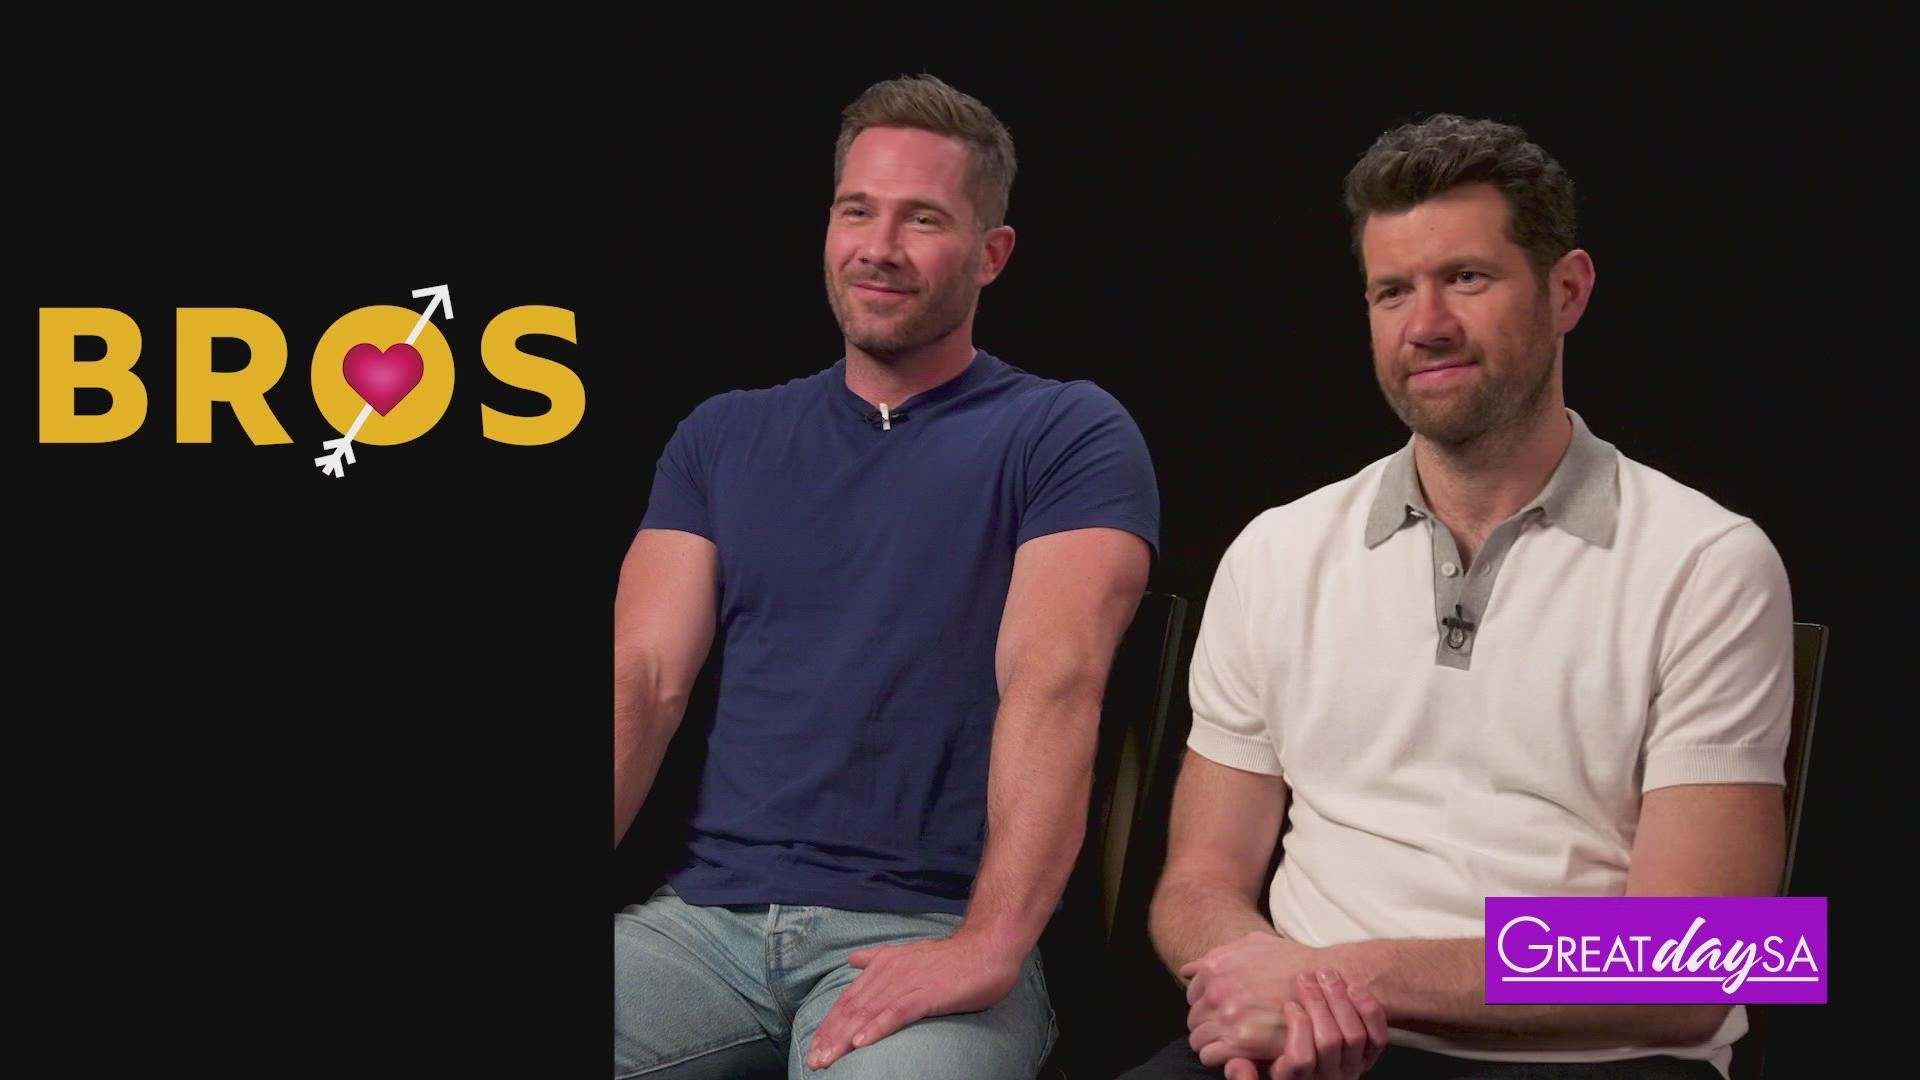 A new rom-com is giving the LGBTQ+ community a time to shine! Our photojournalist, Justin Calderon interviewed the actors from the movie "Bros".